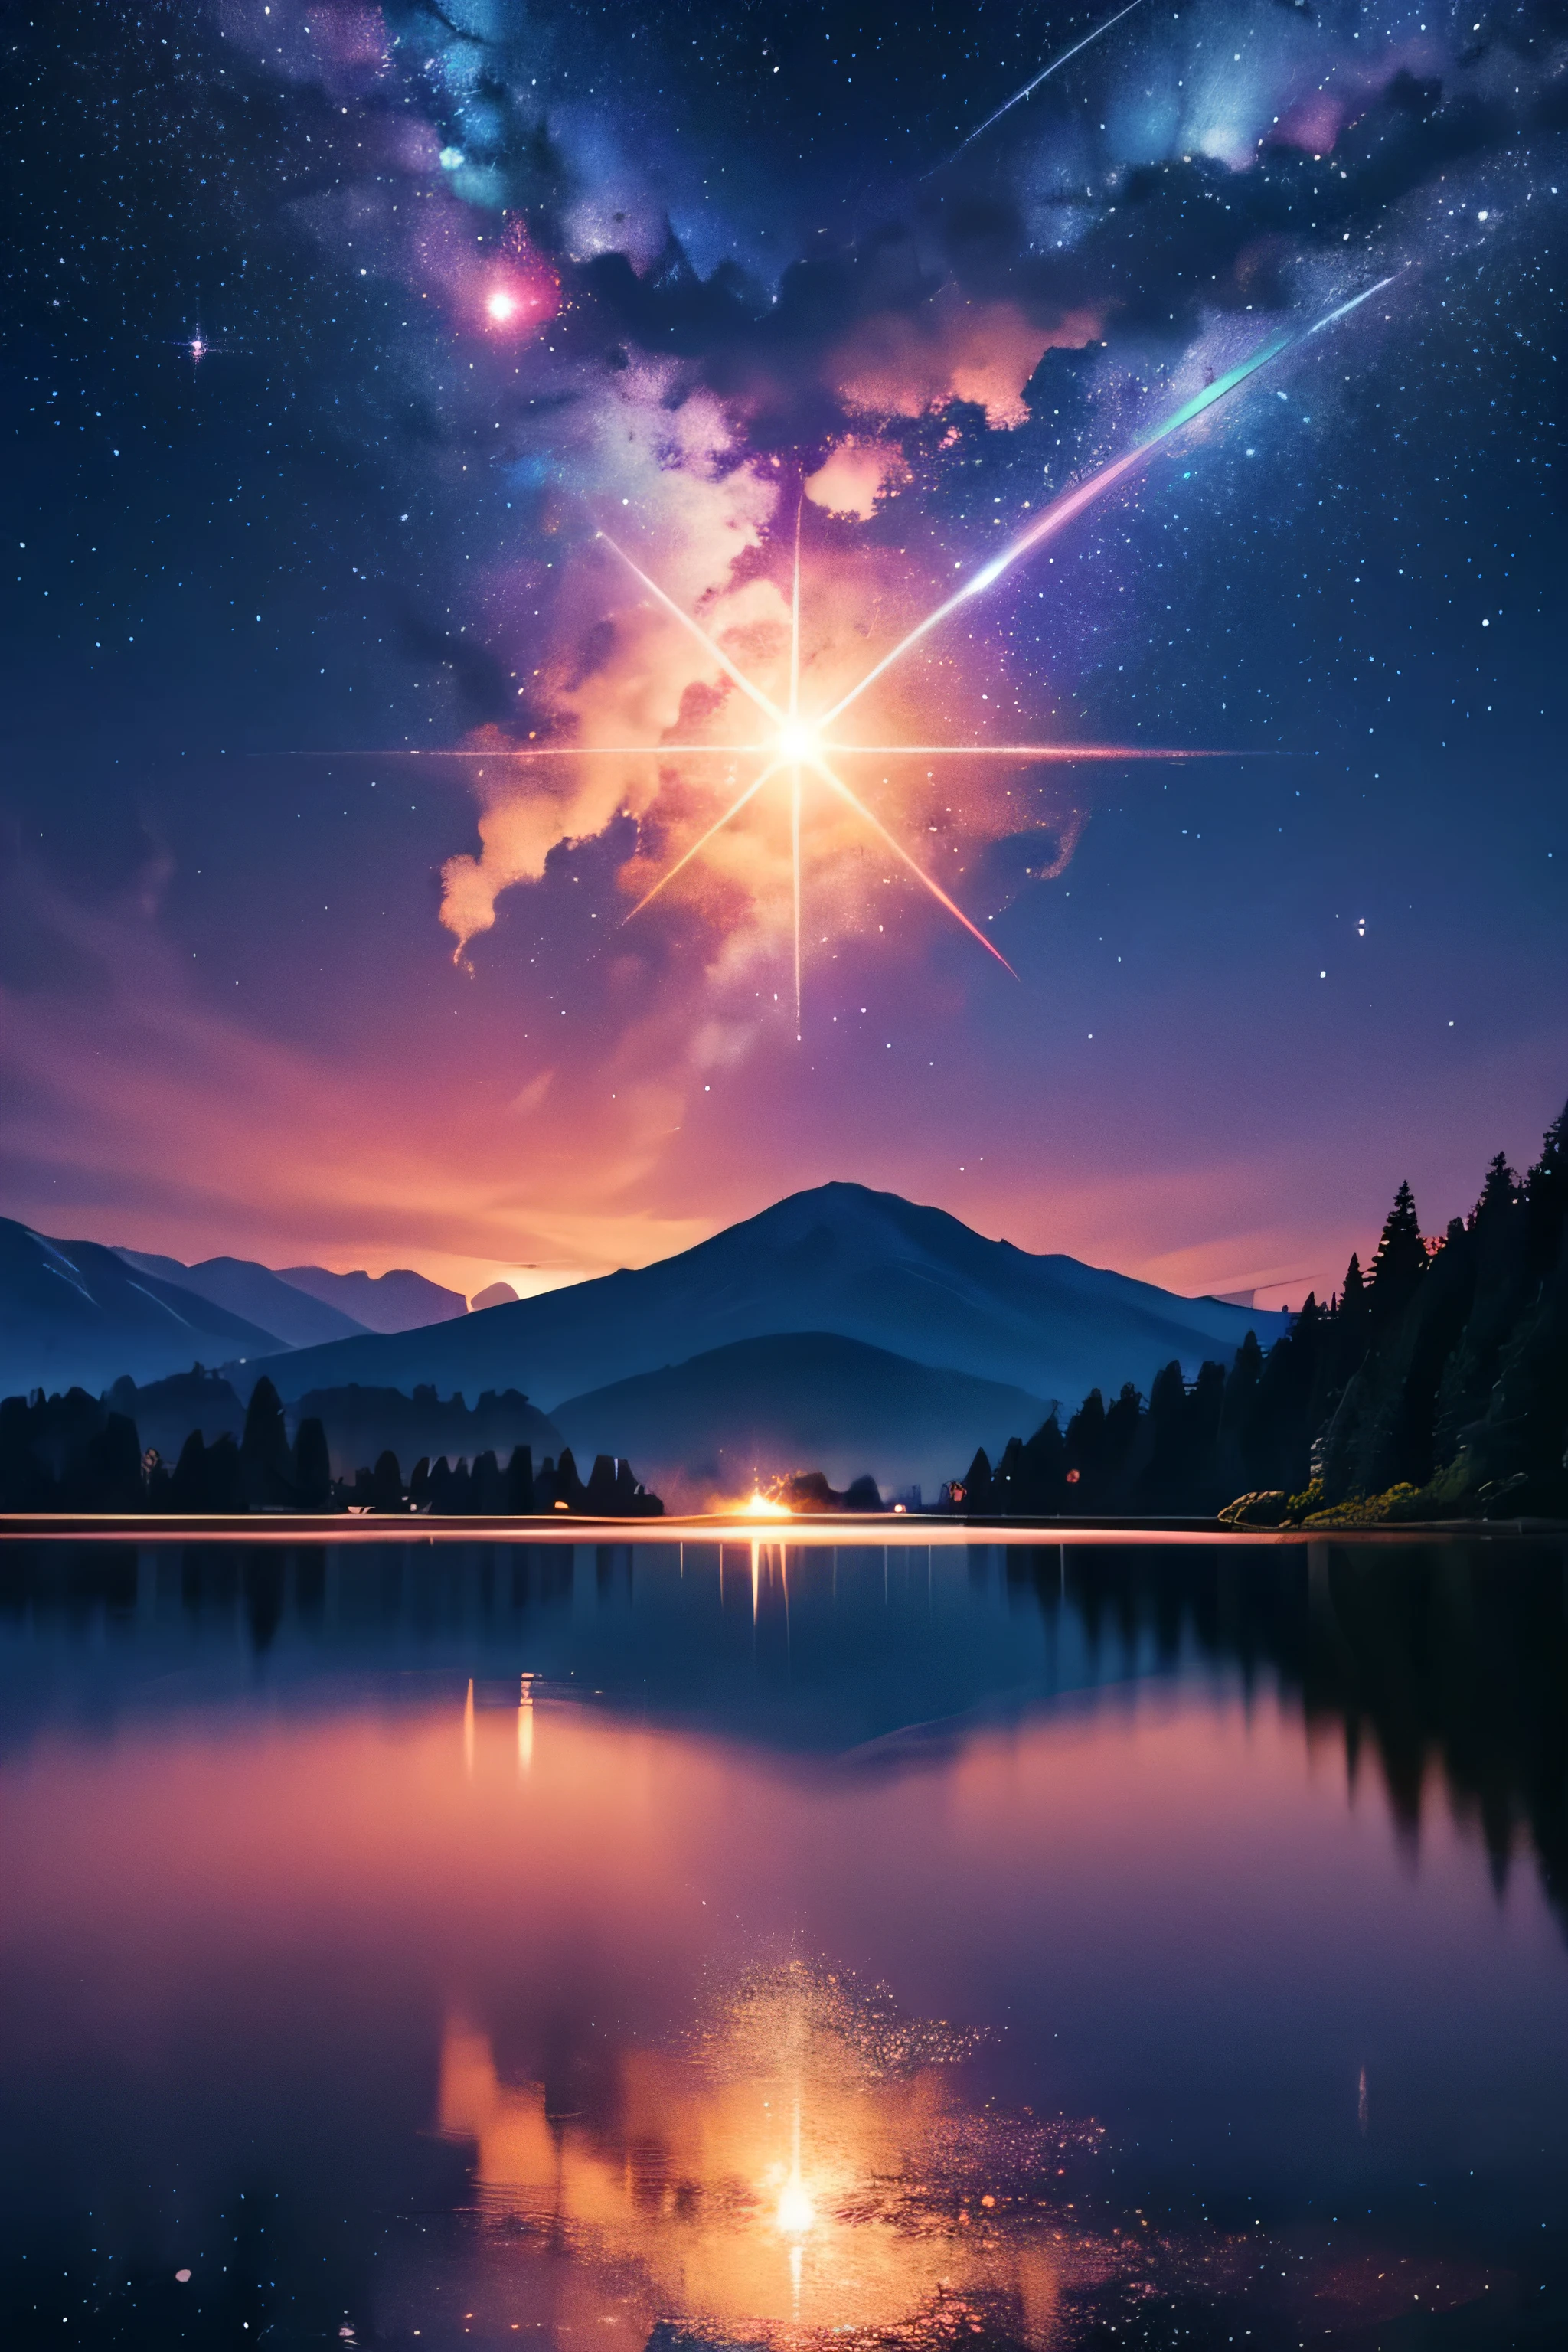 Generate an image of a spring night over a lake reflecting a star-filled universe, vibrant colors, and the onset of dawn